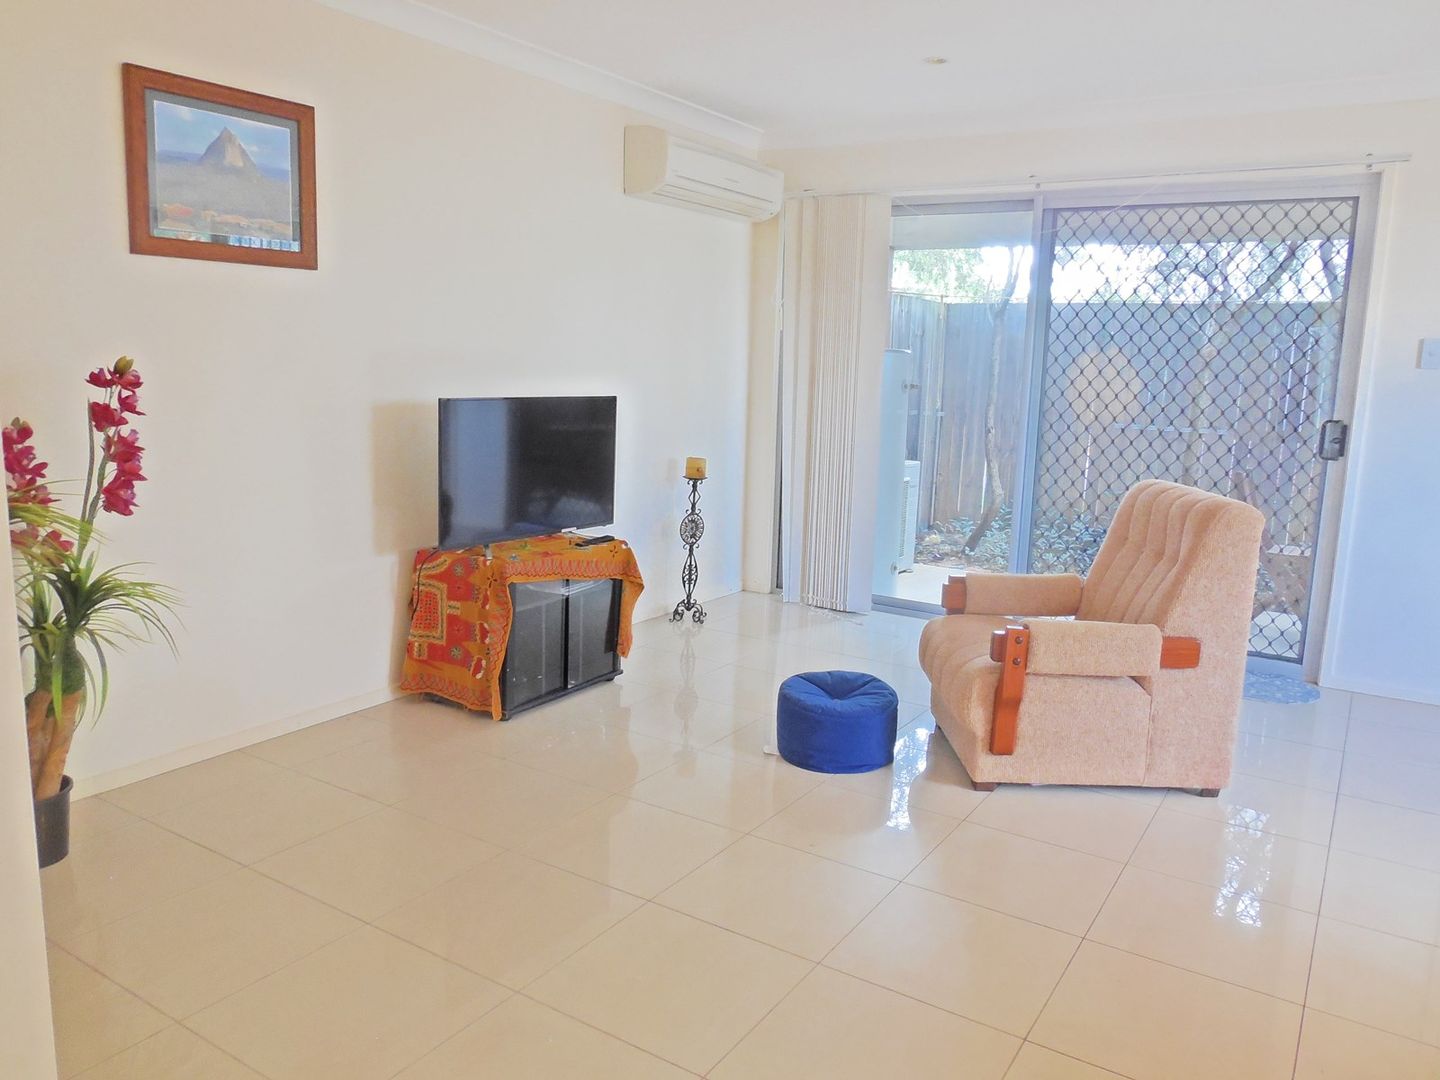 3/105 KING ST, Caboolture QLD 4510, Image 1